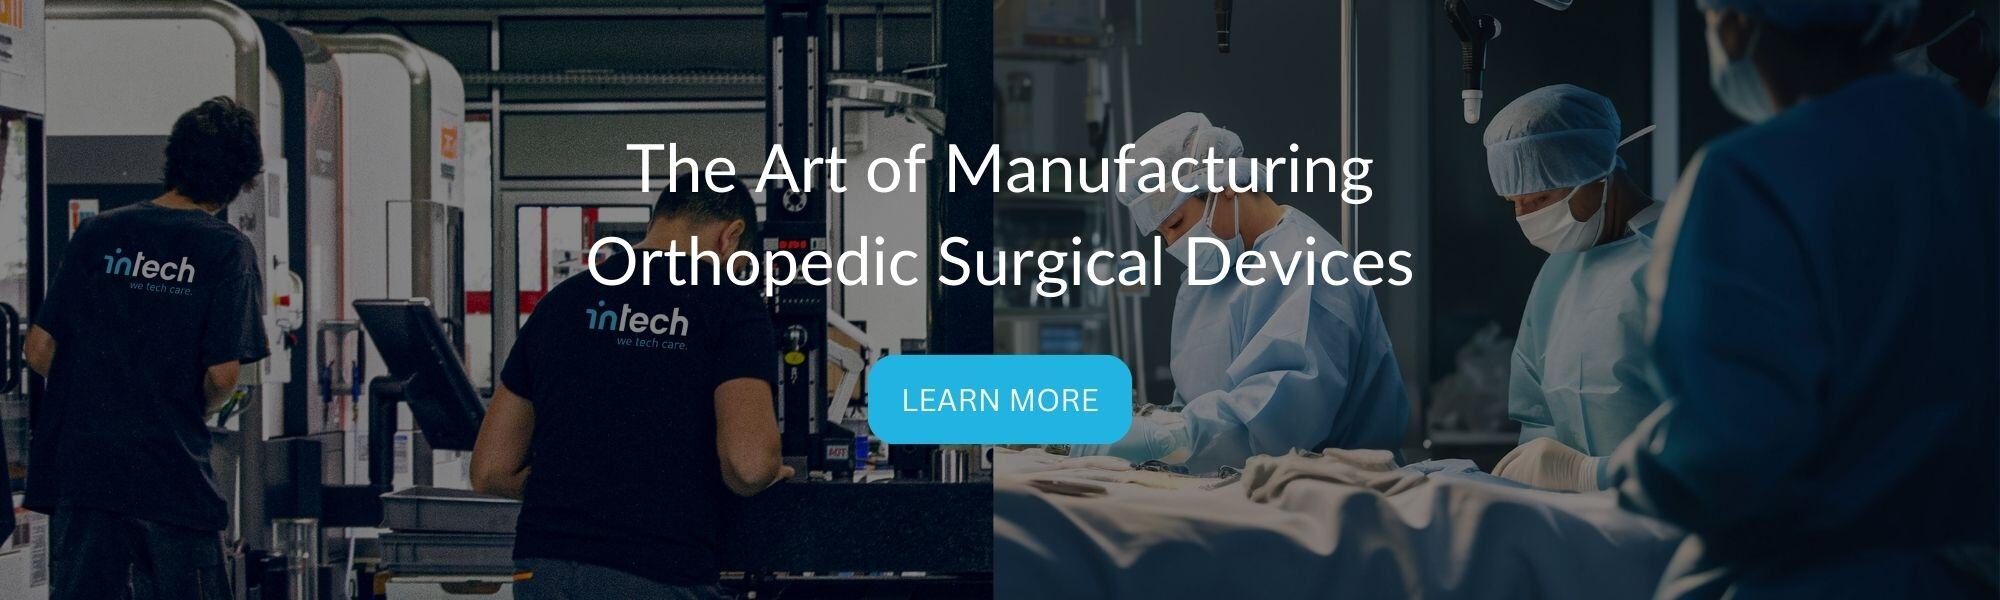 the art of manufacturing medical device banner